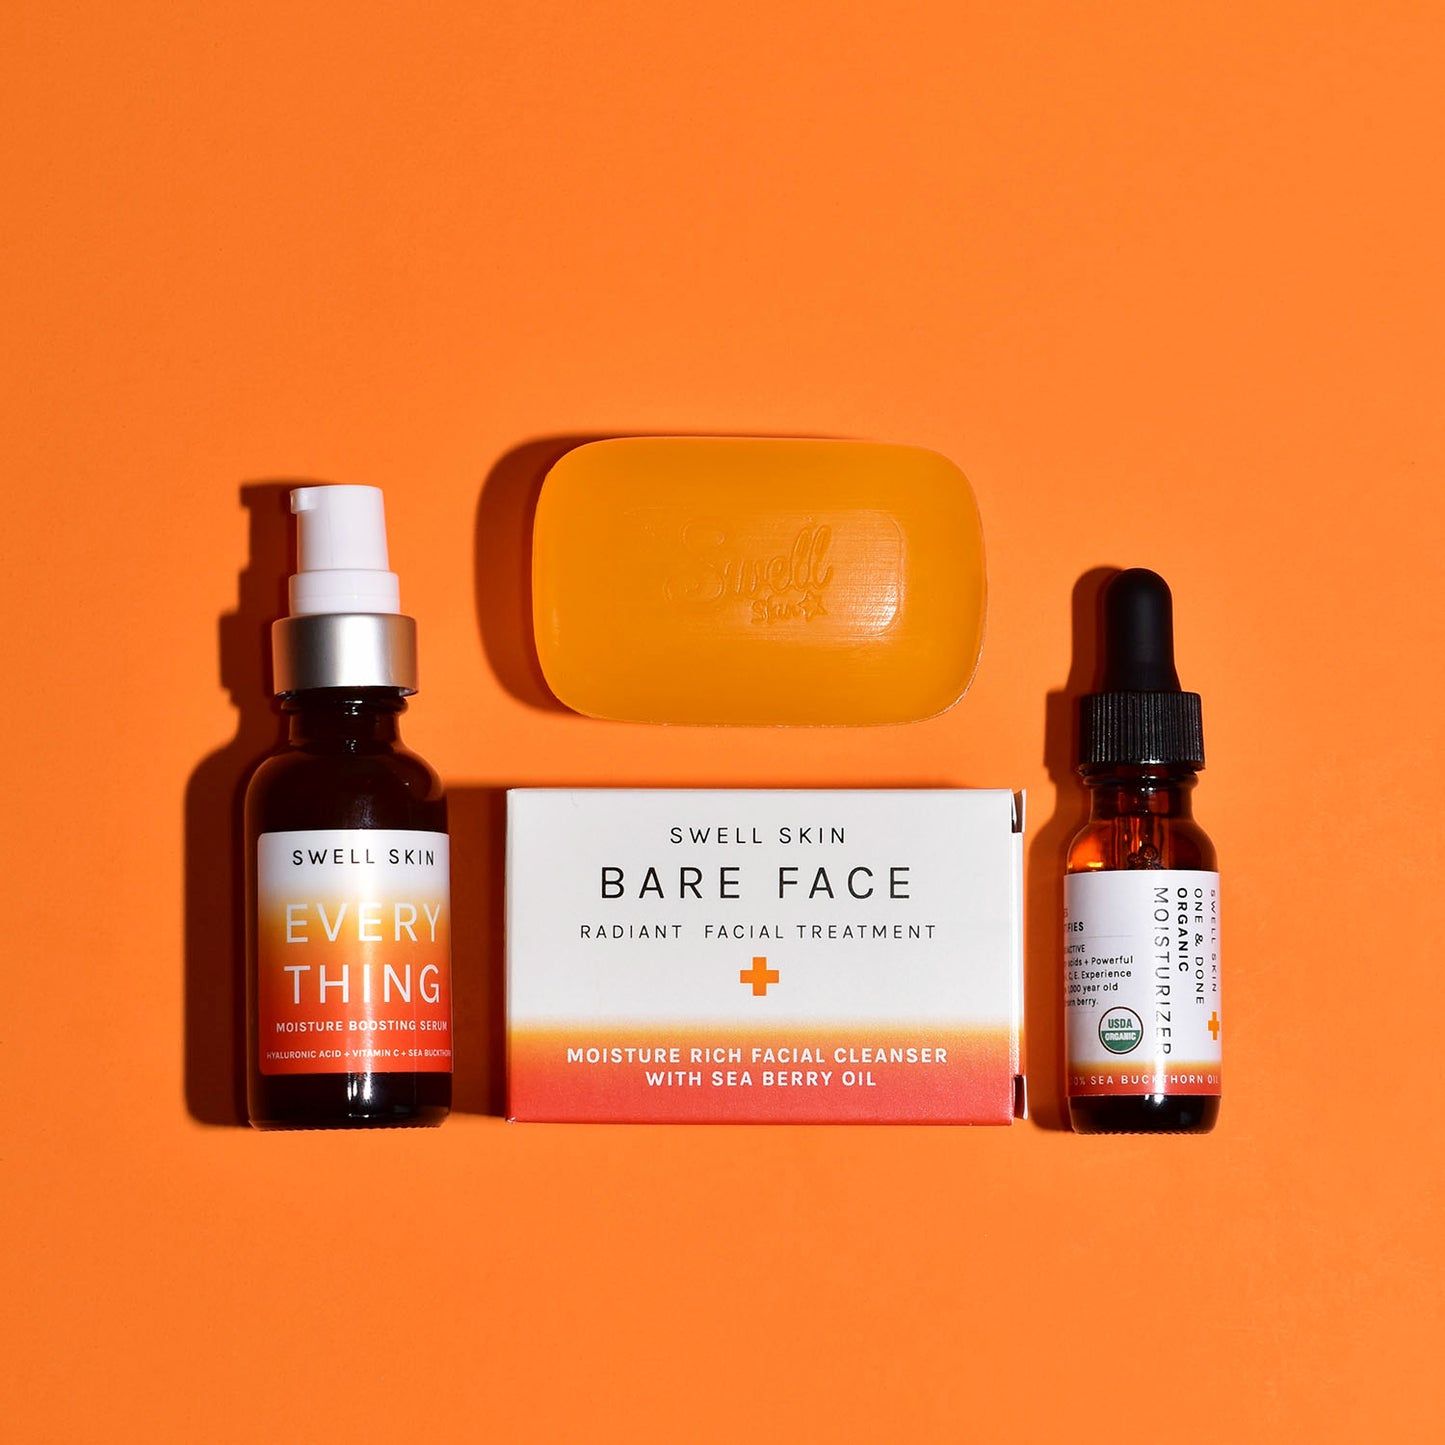 The Hydrate & Firm Kit